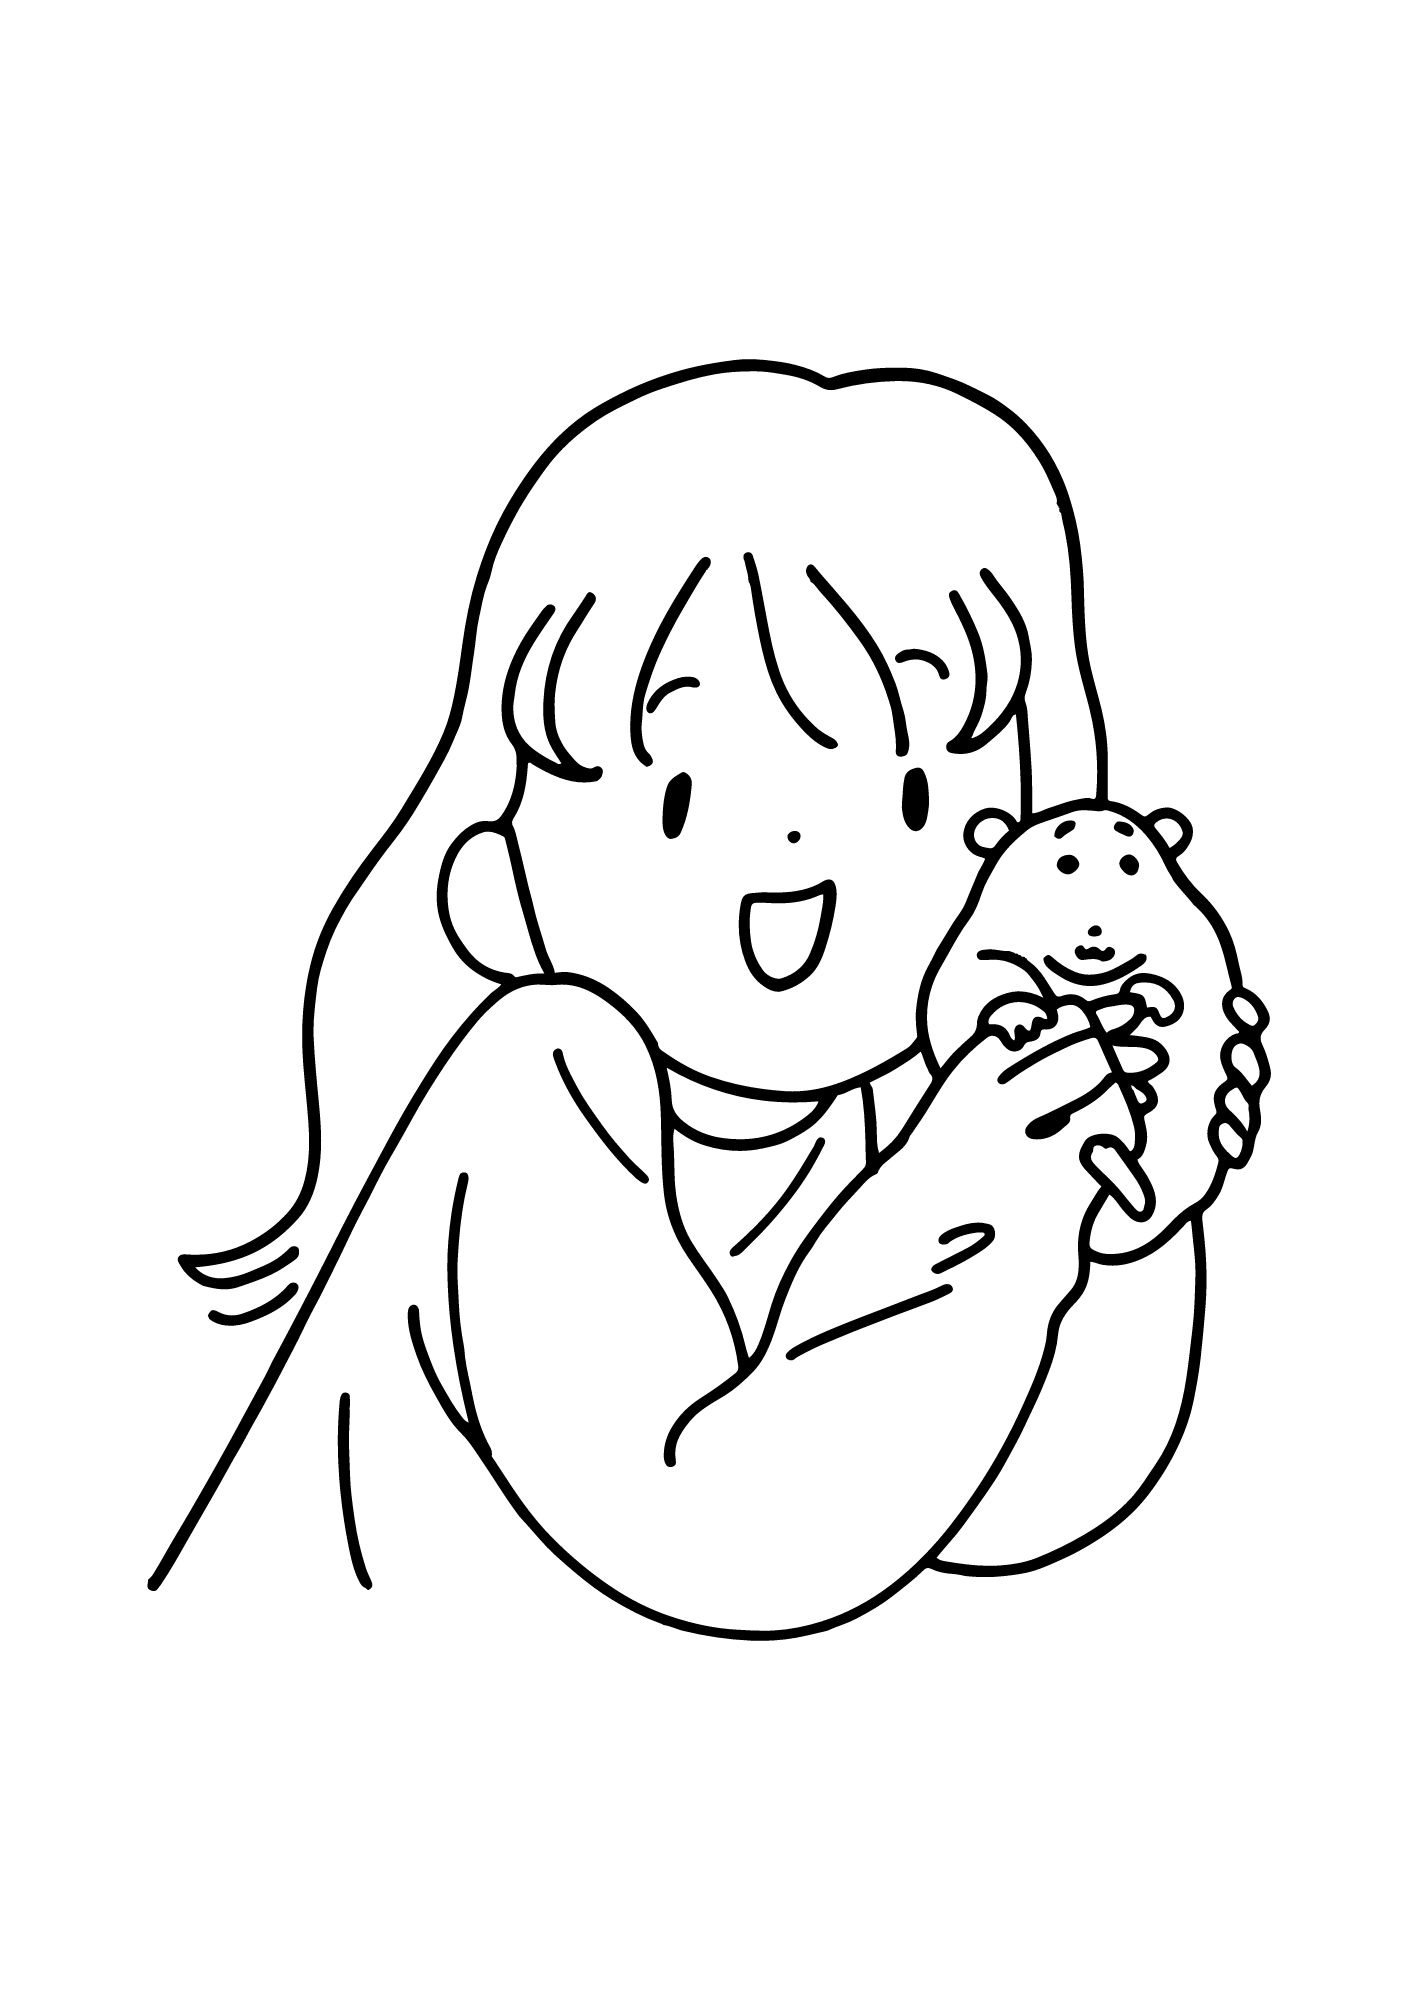 coloring page girl with a hamster in her hands